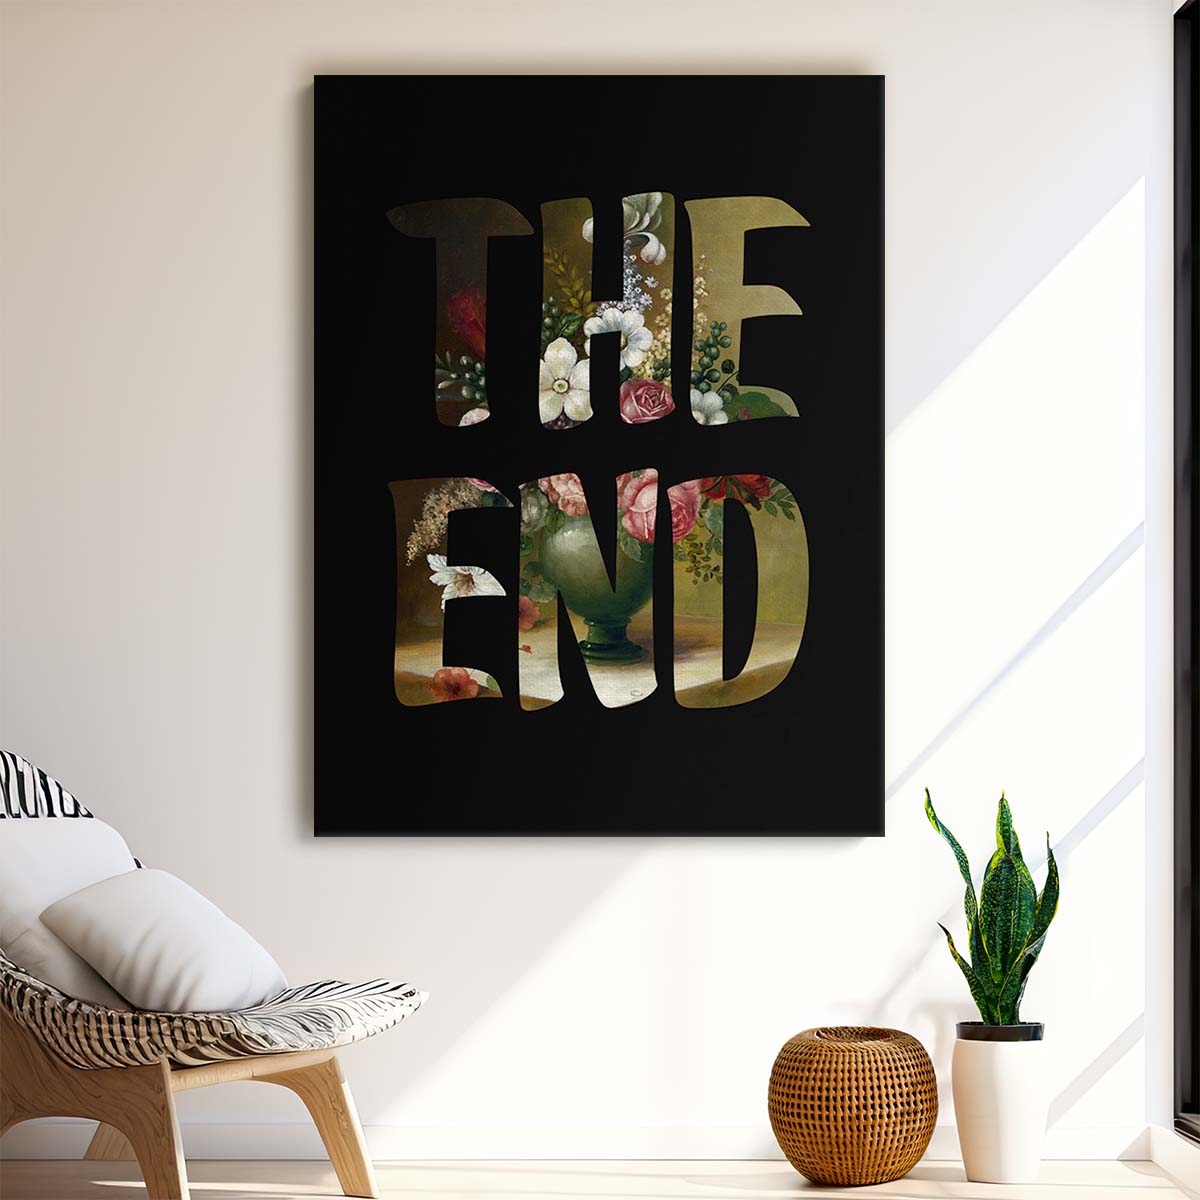 THE END Floral Dark Oil Painting Illustration by Famous When Dead by Luxuriance Designs, made in USA